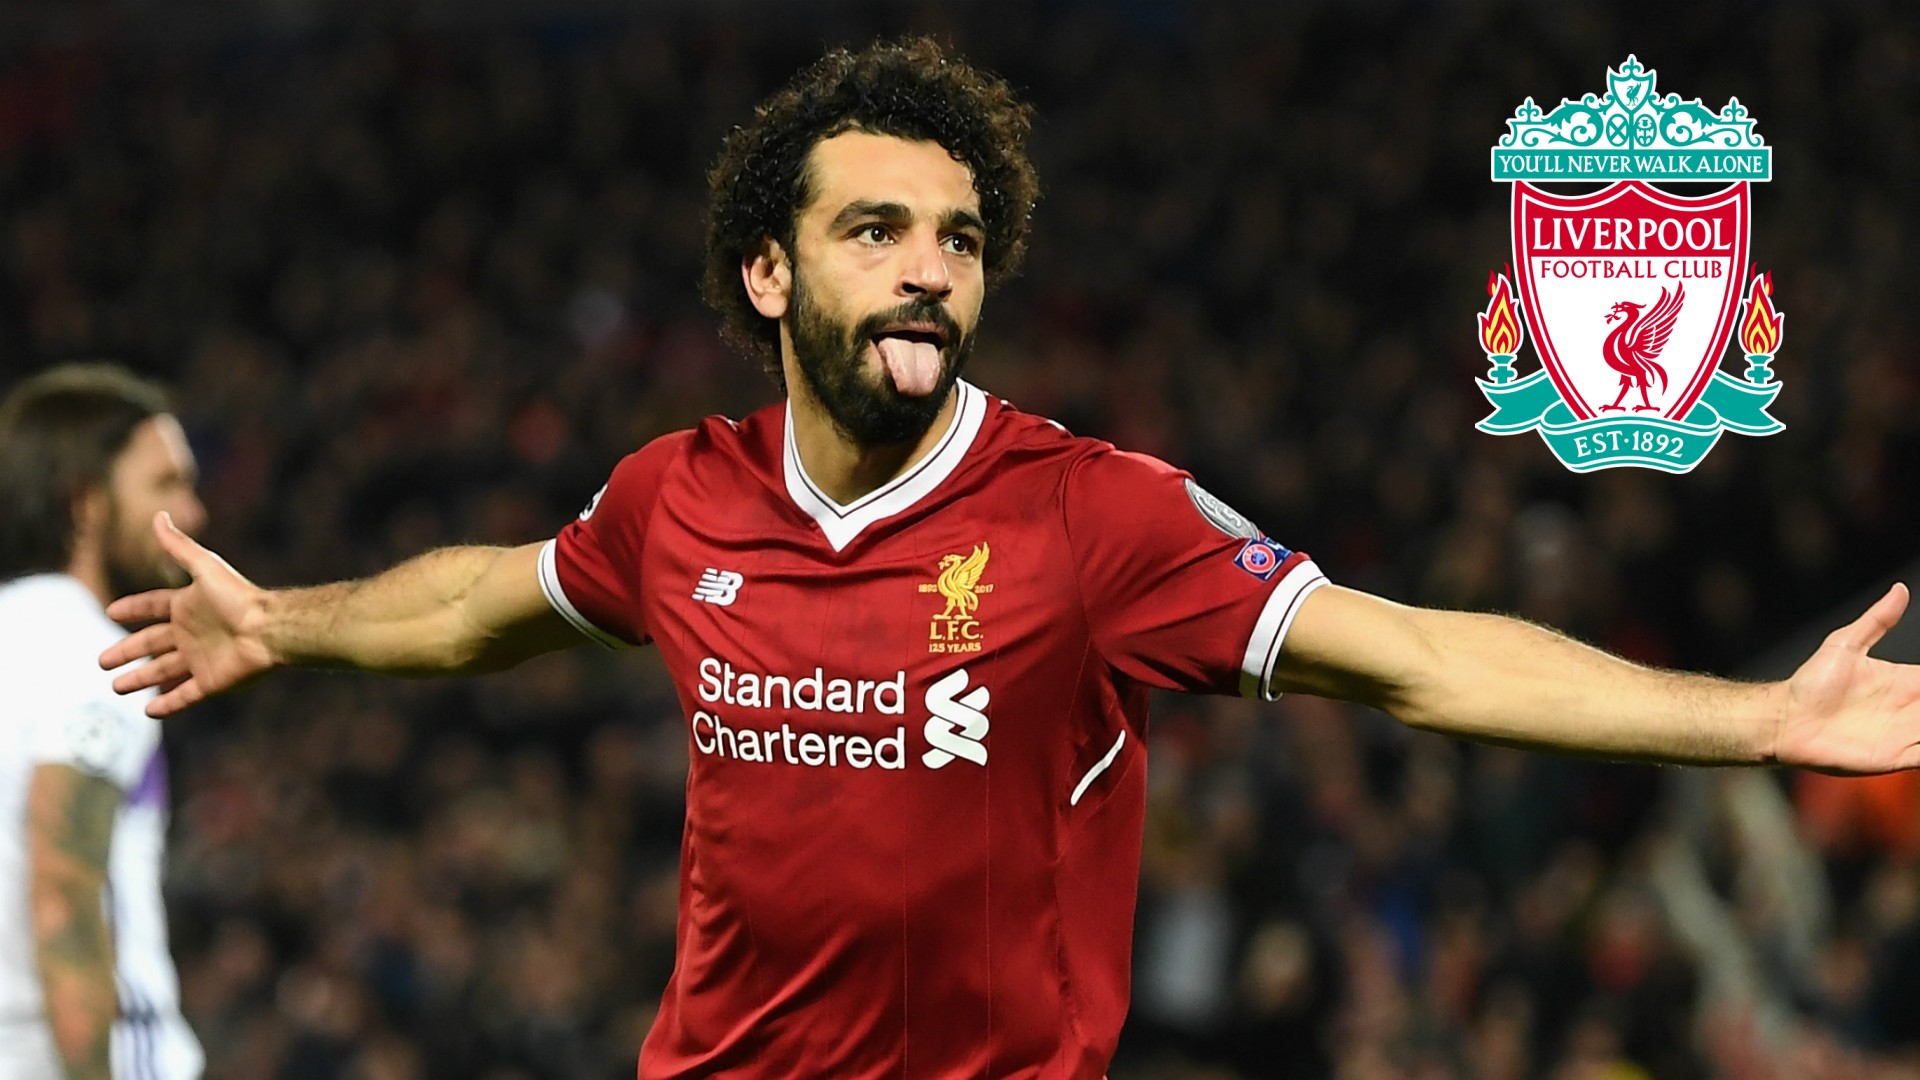 Mohamed Salah Desktop Backgrounds HD with resolution 1920X1080 pixel. You can use this wallpaper as background for your desktop Computer Screensavers, Android or iPhone smartphones